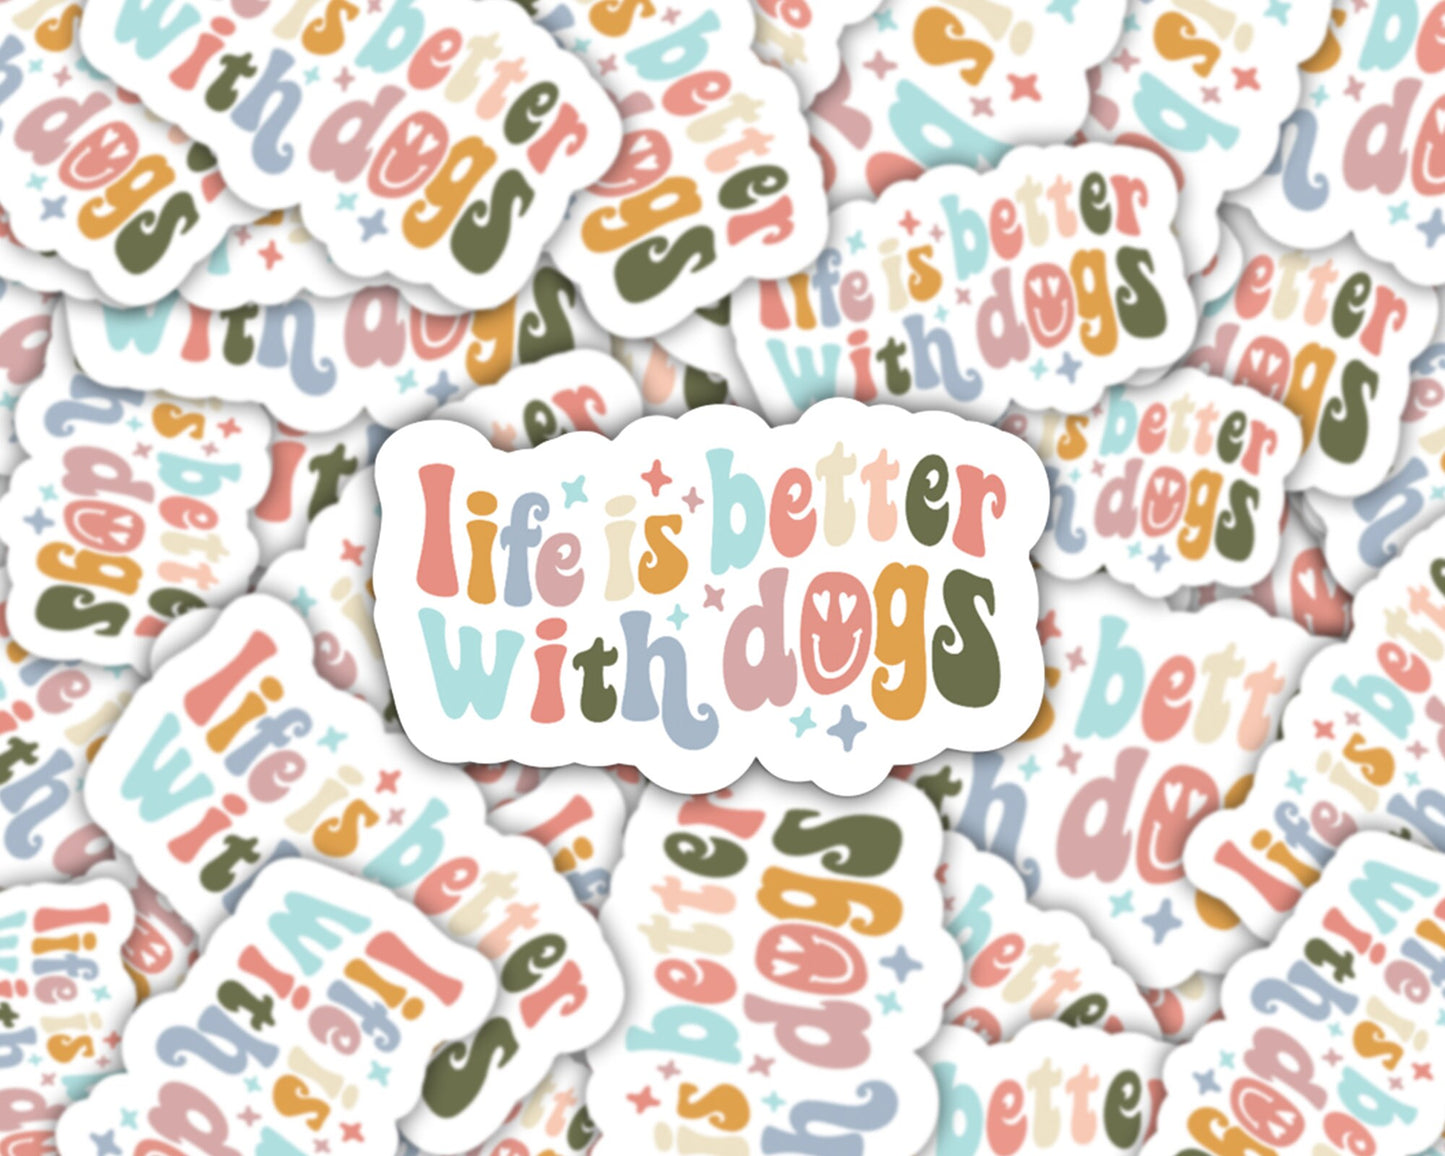 life is better with dogs, dog stickers, dog lover gifts, pet shop stickers, dog mom, dogs over people, goldendoodle mom, pittie stickers